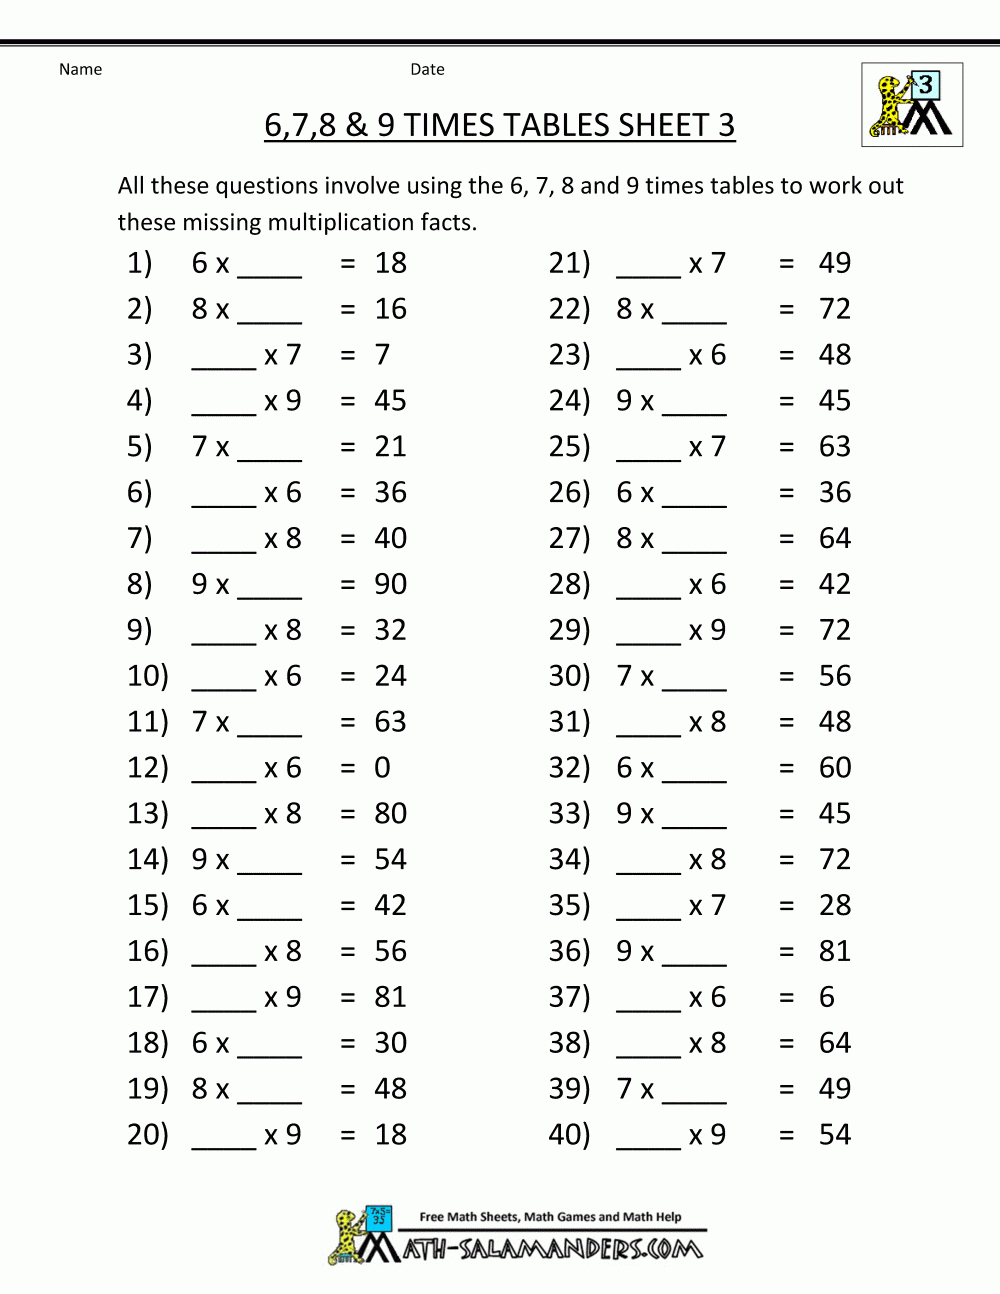 Free Multiplication Worksheets 6 7 8 9 Times Tables 3 intended for Multiplication Worksheets Year 9